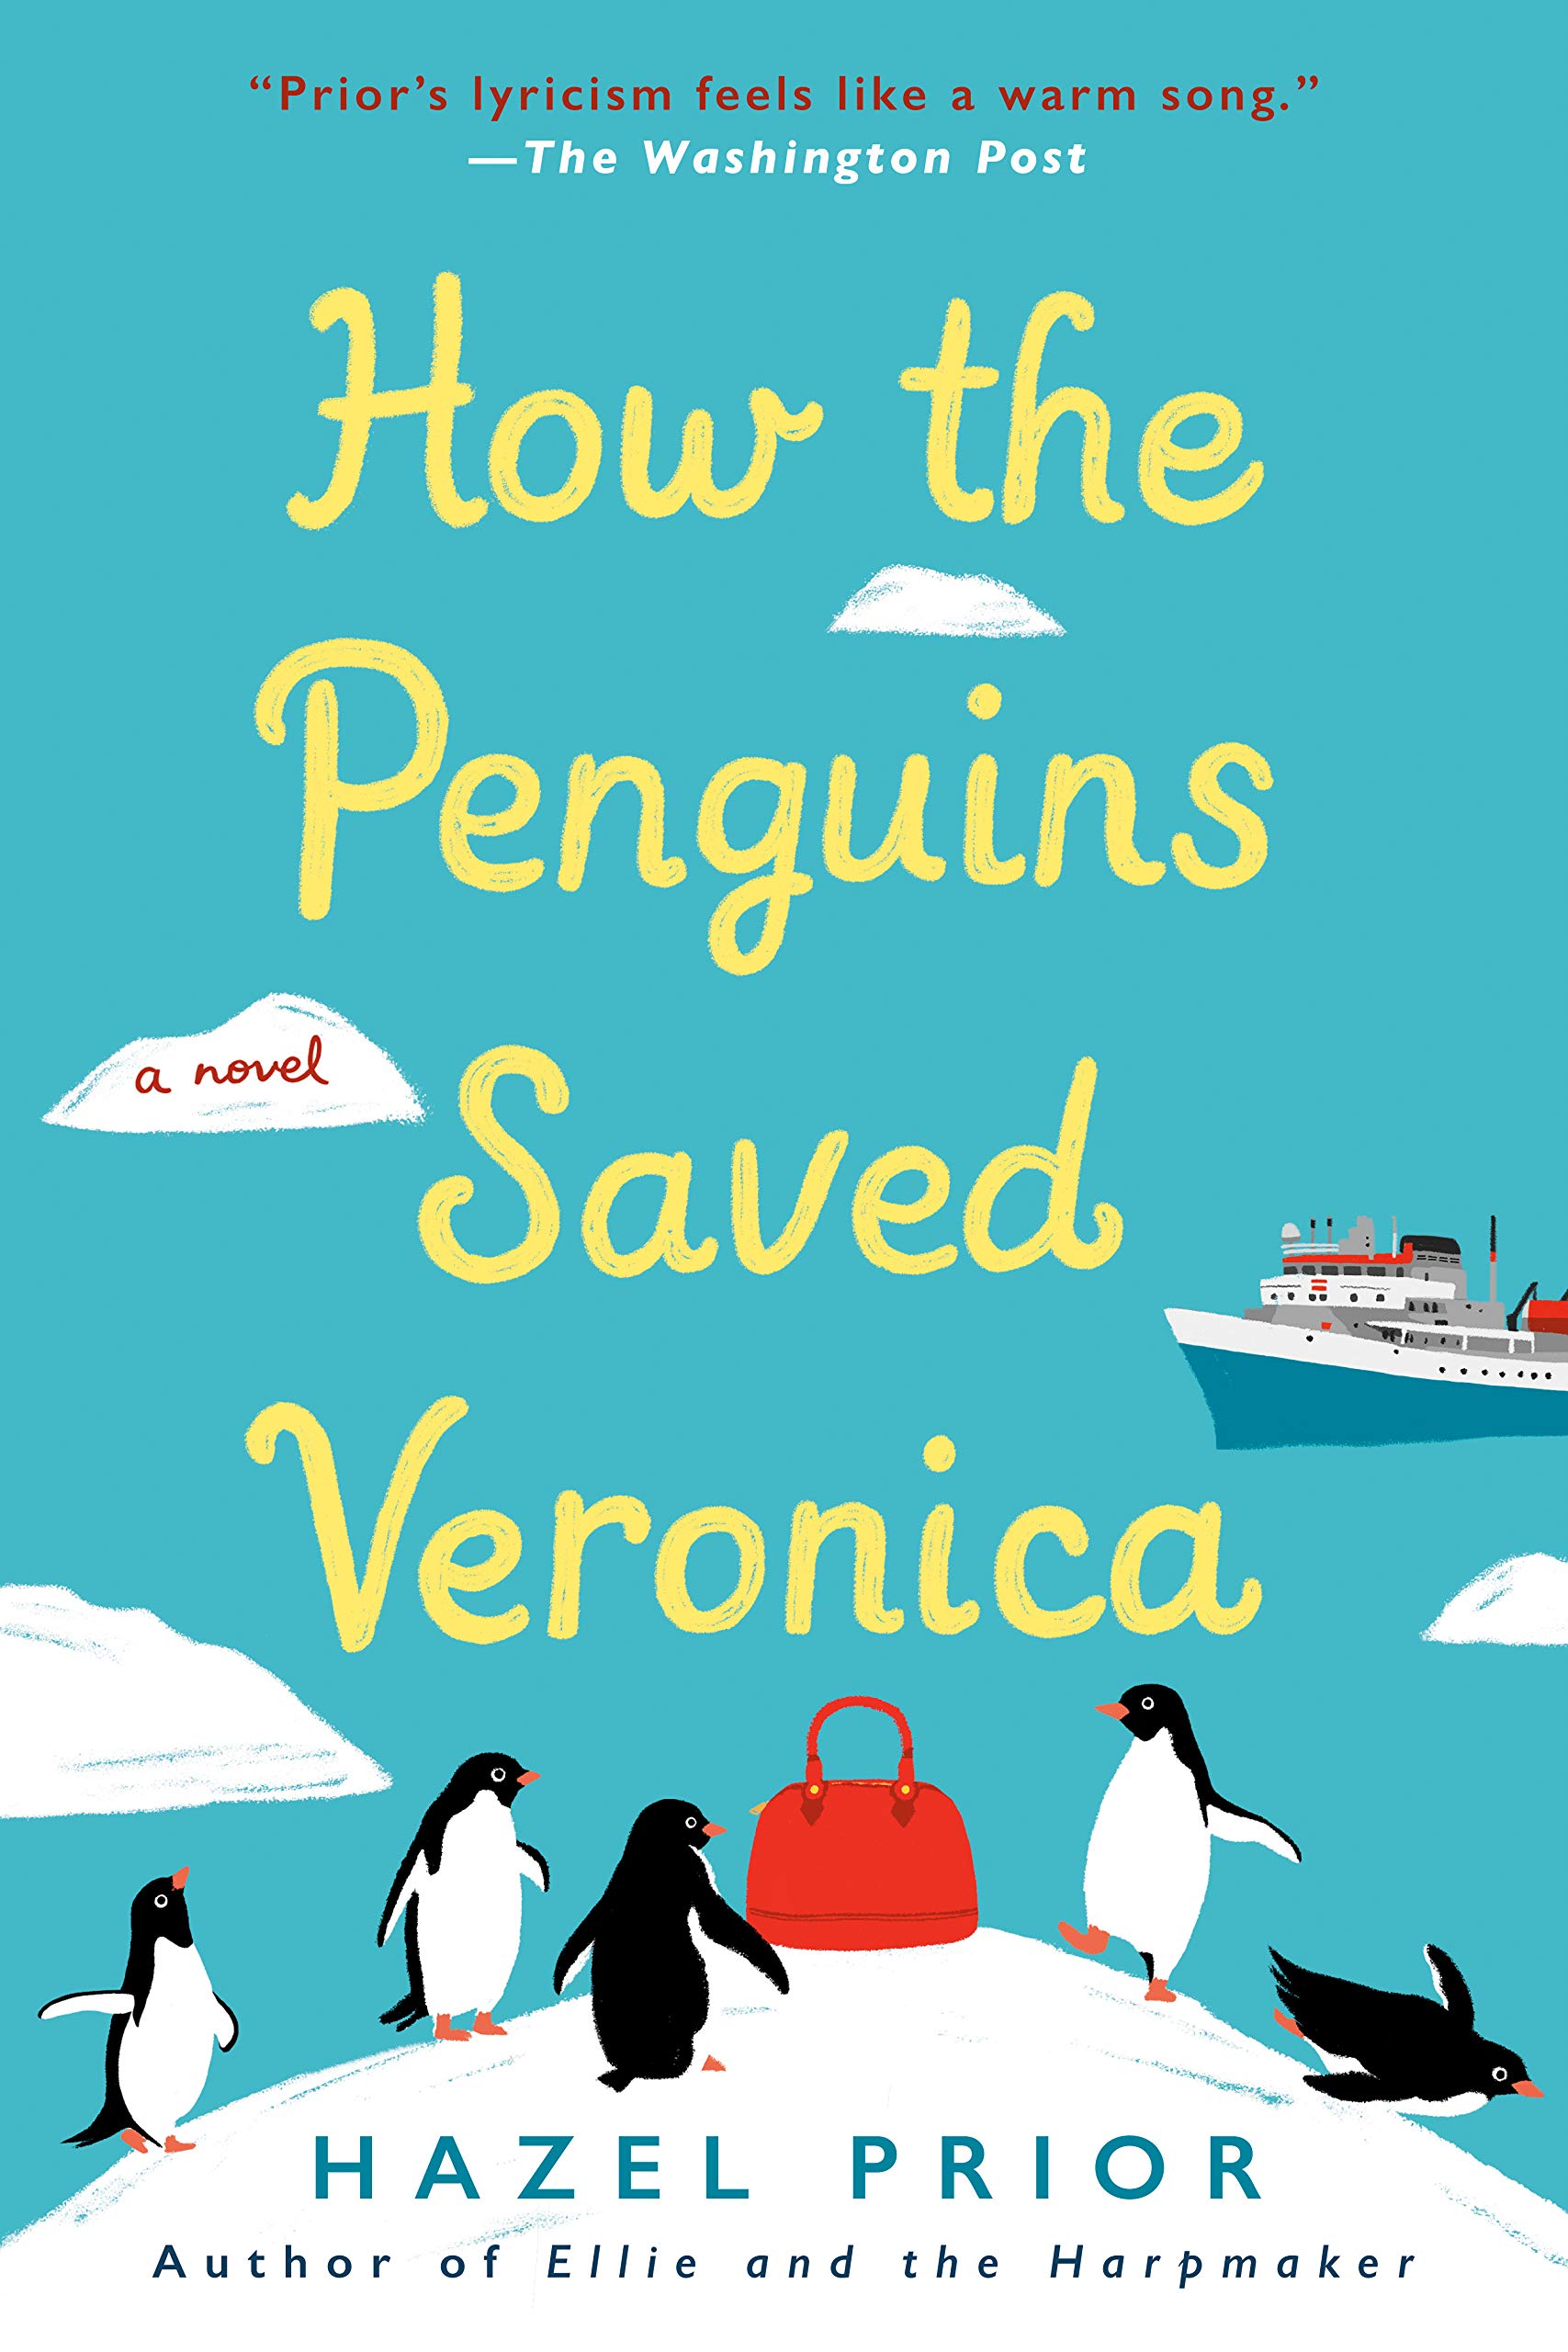 How the Penguins Saved Veronica by Hazel Prior.